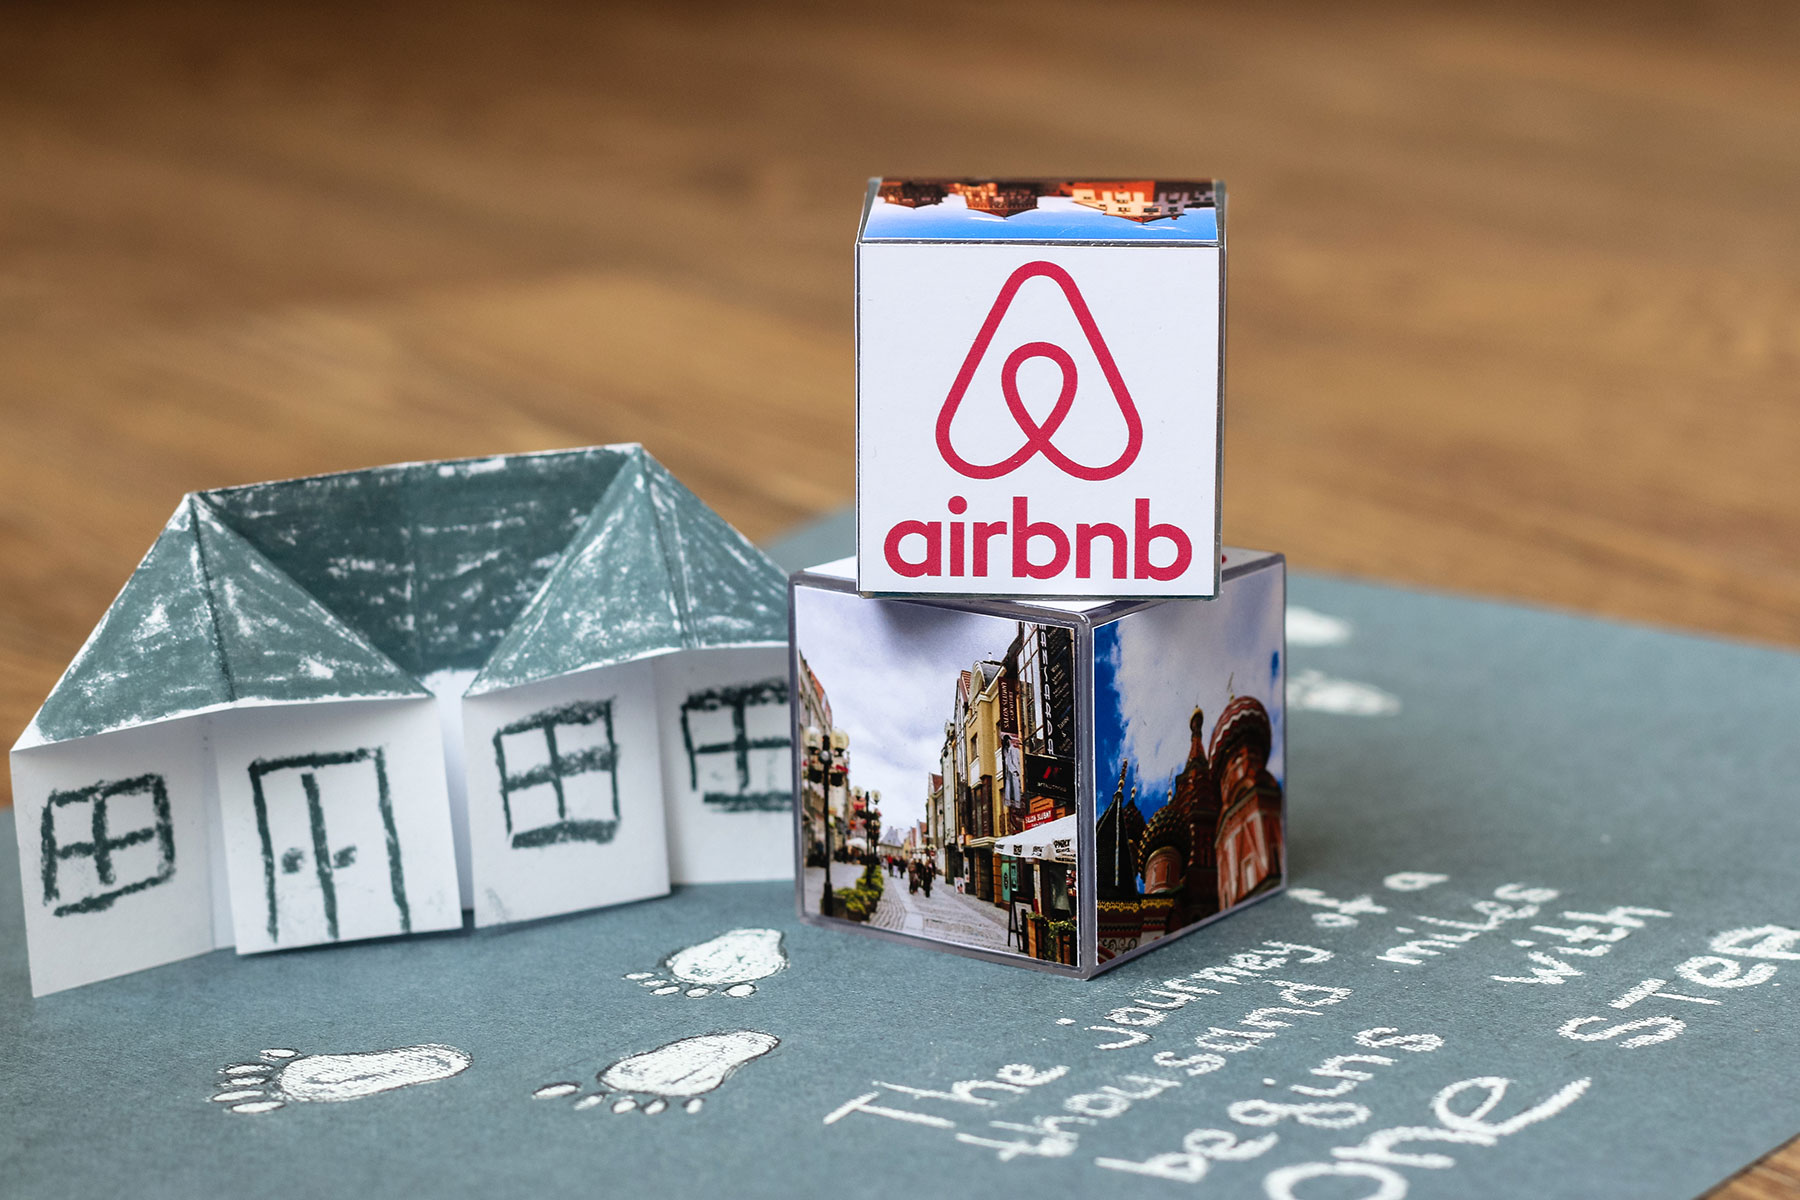 What Makes A Successful Airbnb?